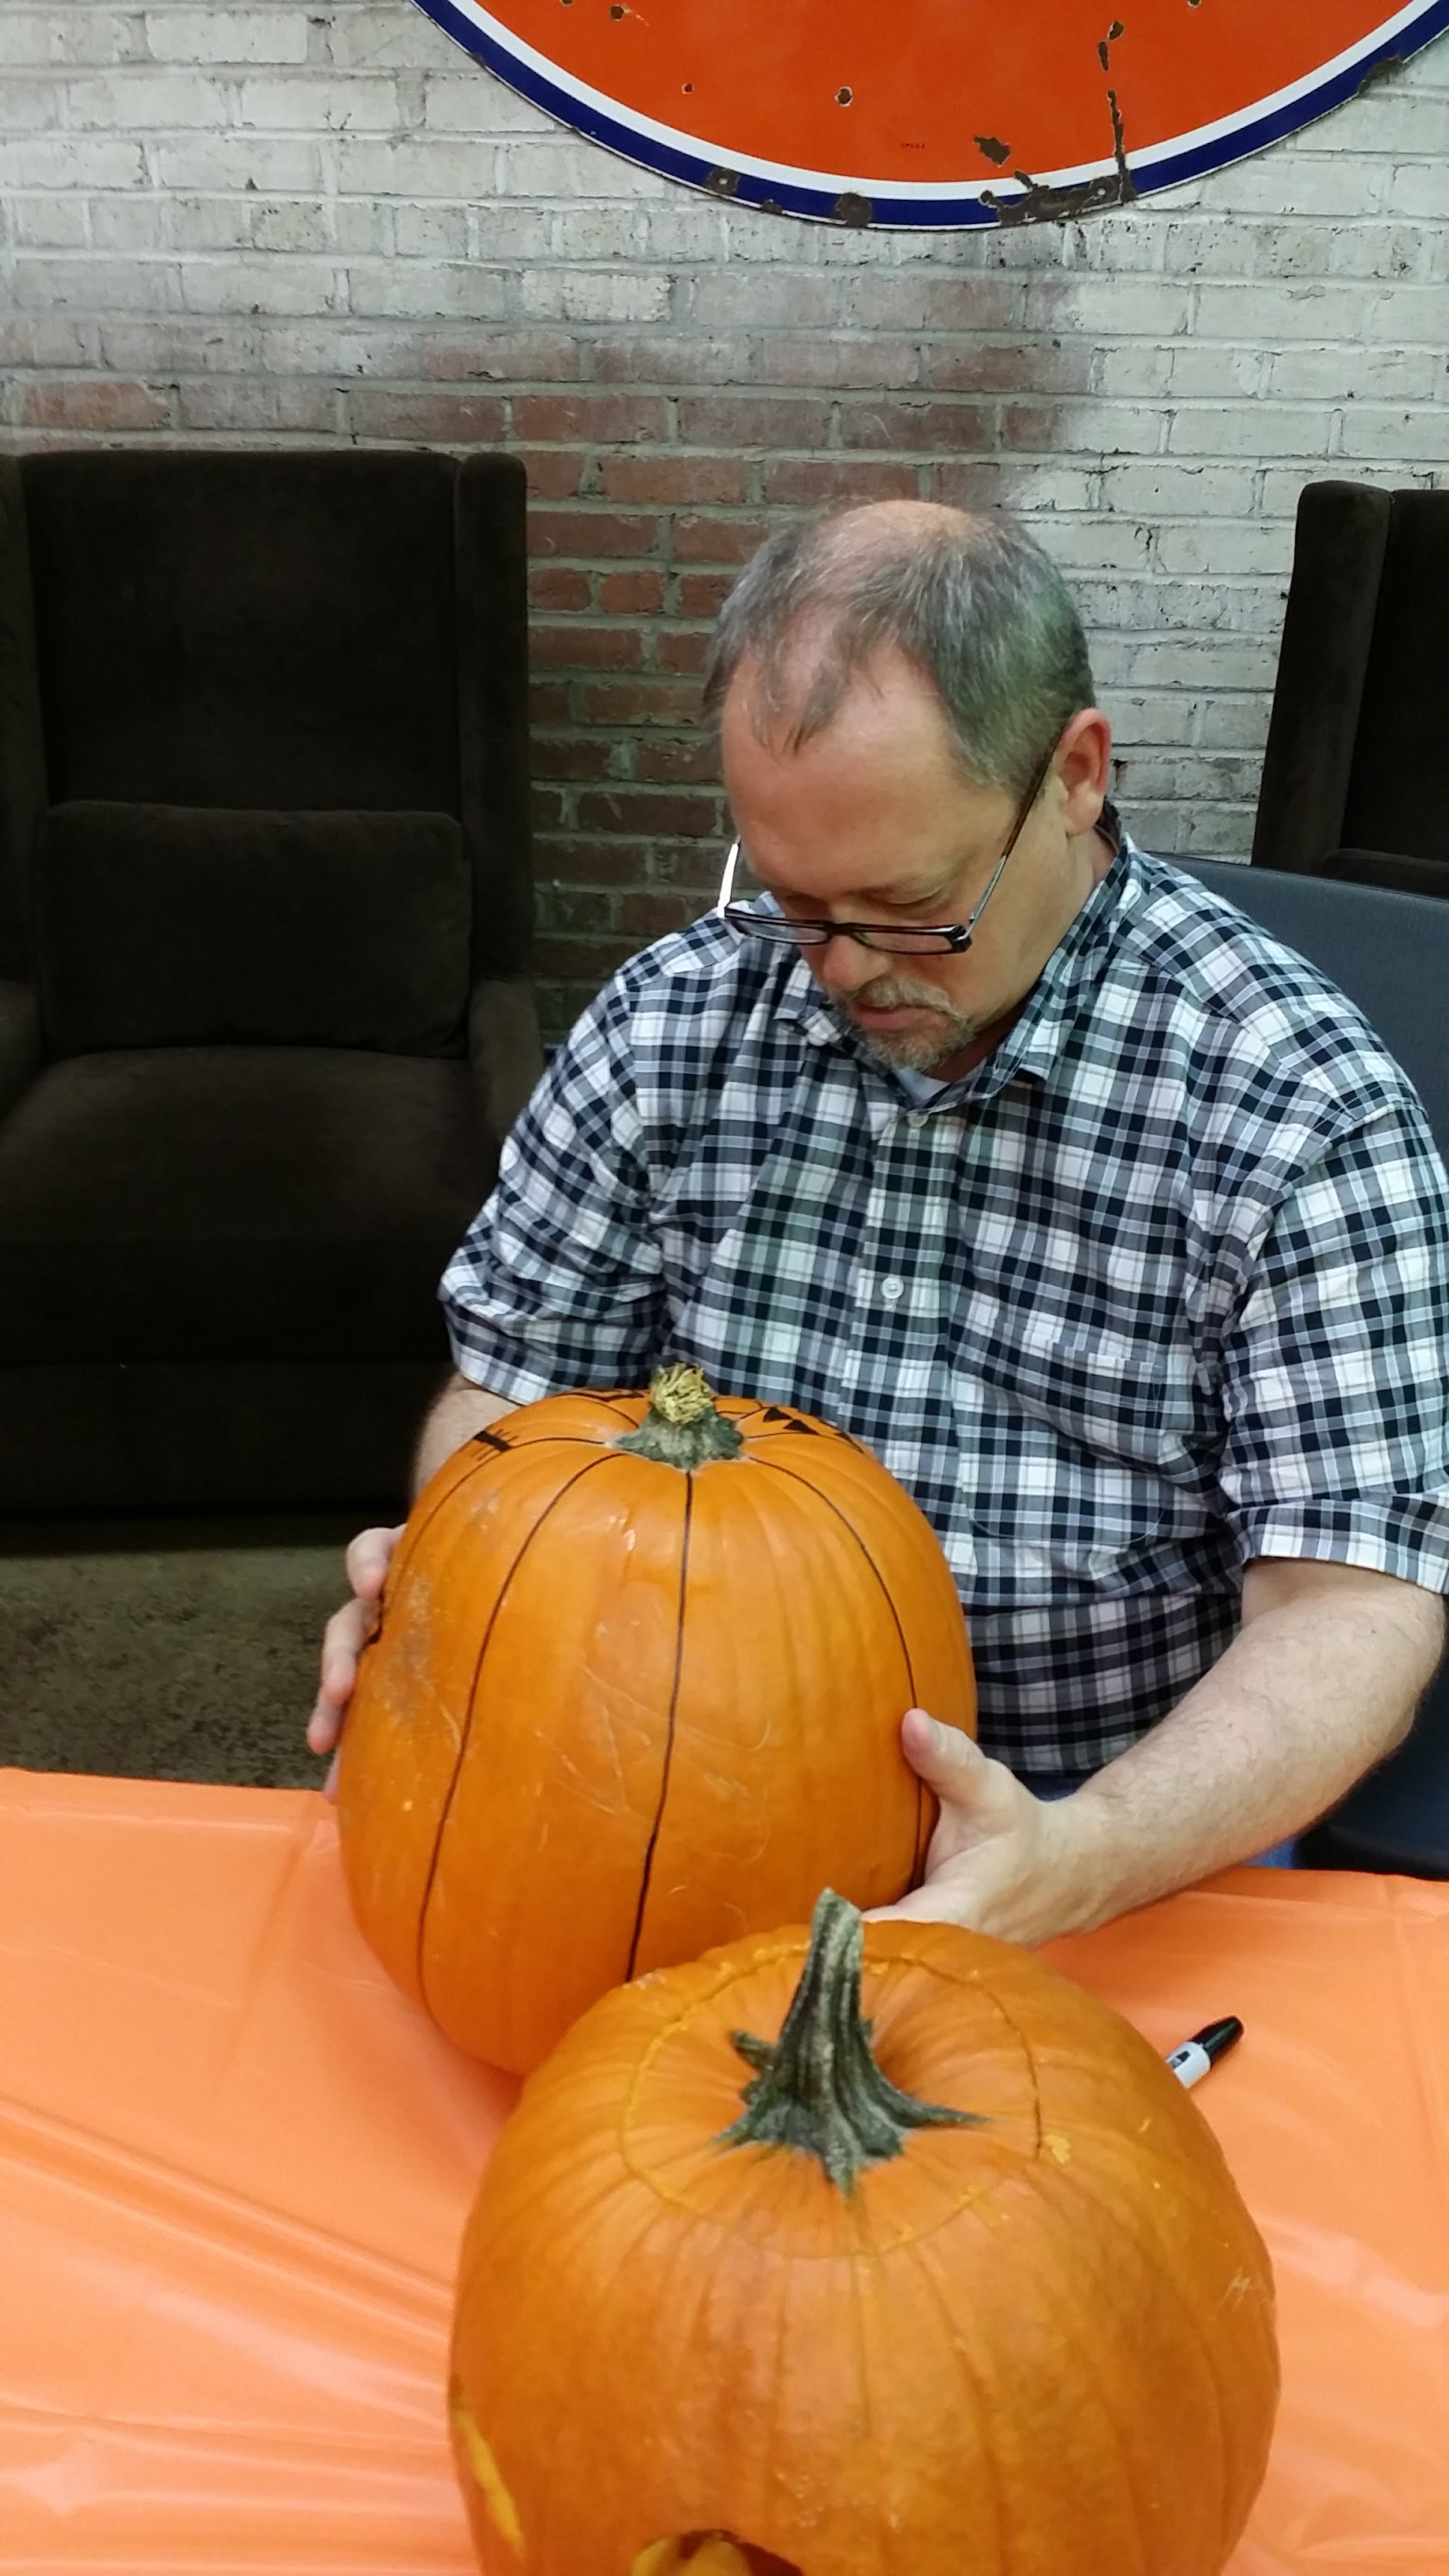 Annual Pumpkin Carving Competition